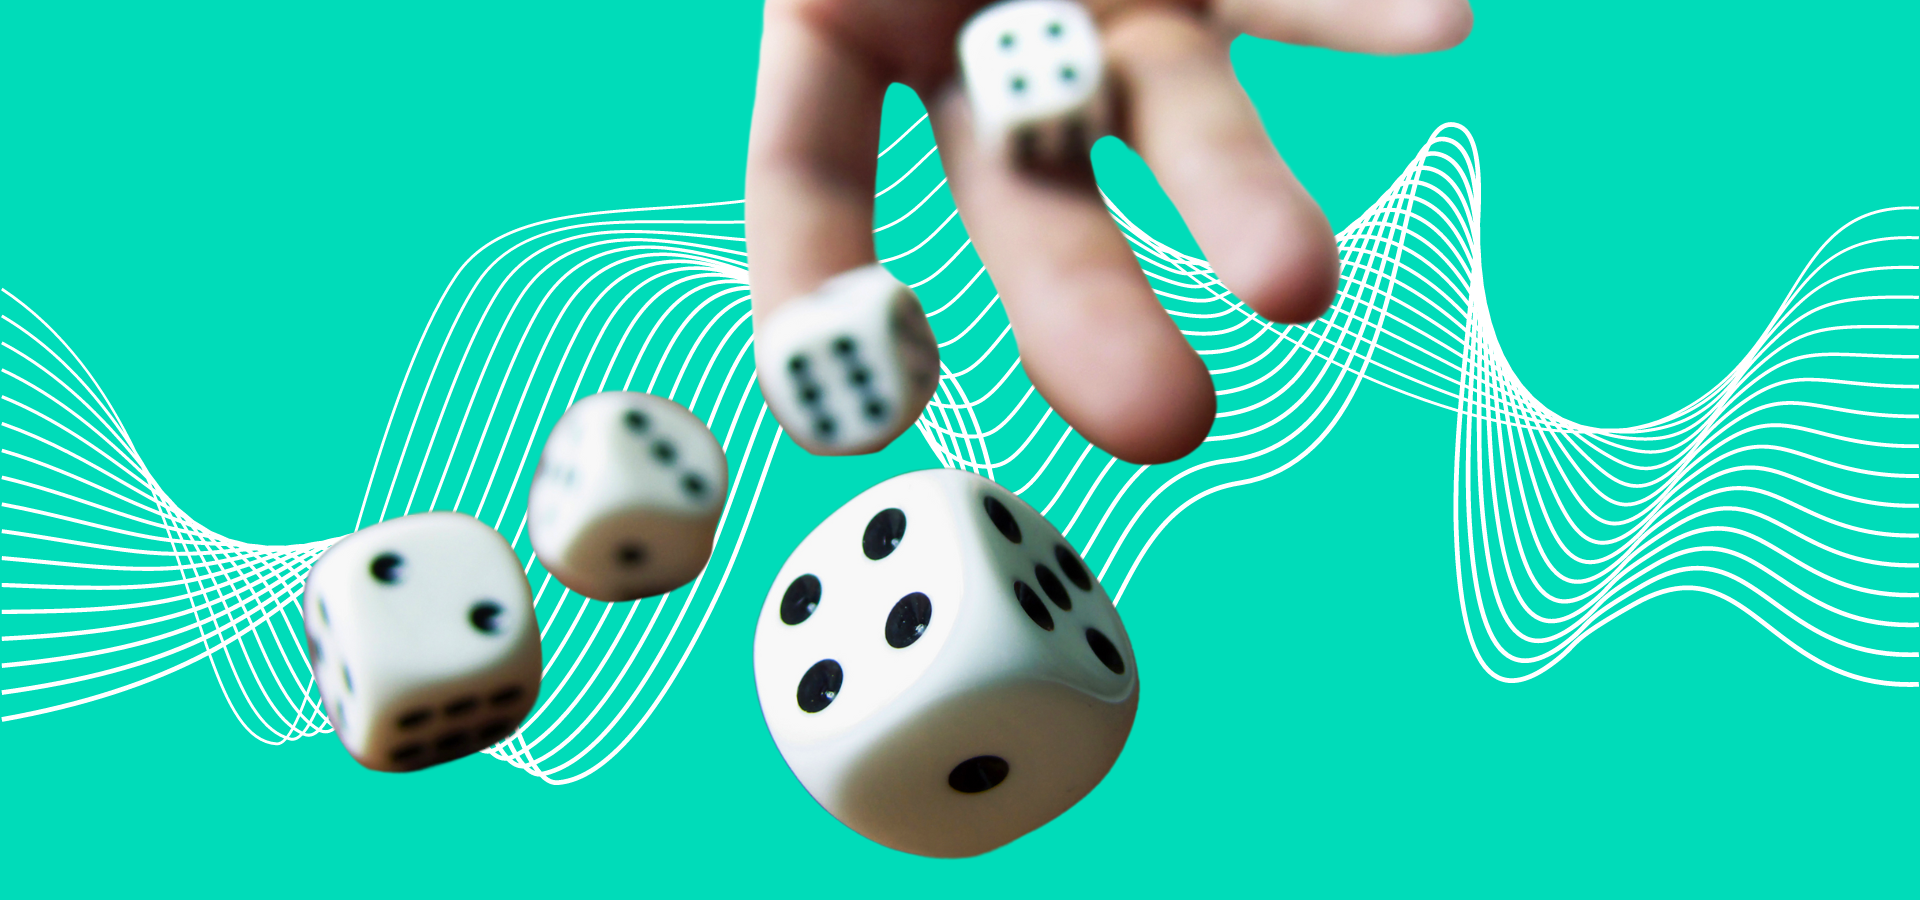 A hand rolling 5 dice